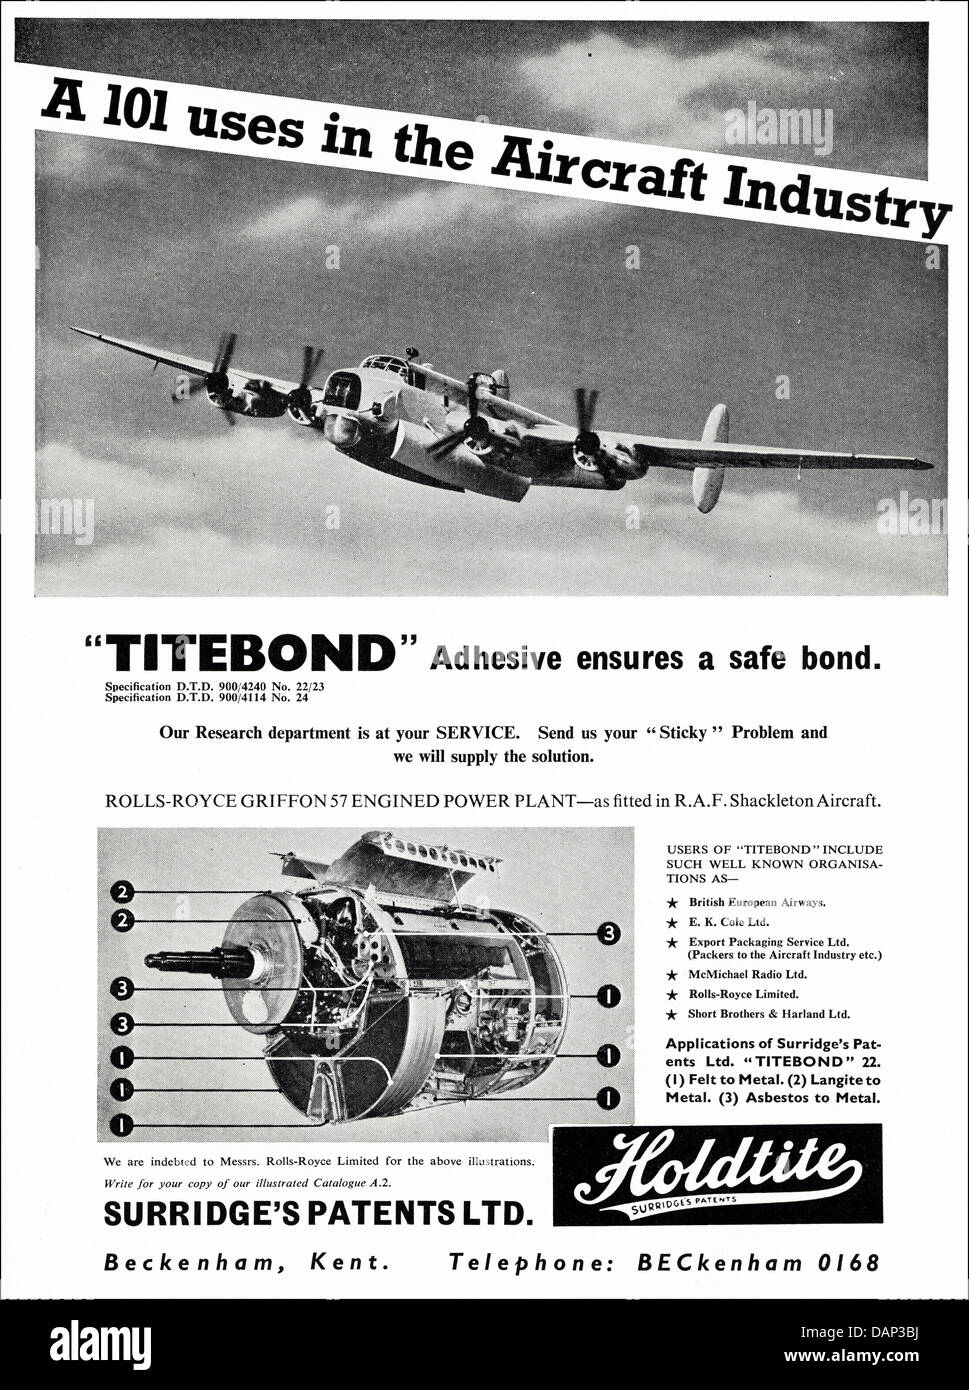 Advert for Titebond adhesive by Surridge's Patents Ltd Beckenham Kent England UK suppliers to the aircraft industry advertisement in trade magazine circa 1955 Stock Photo